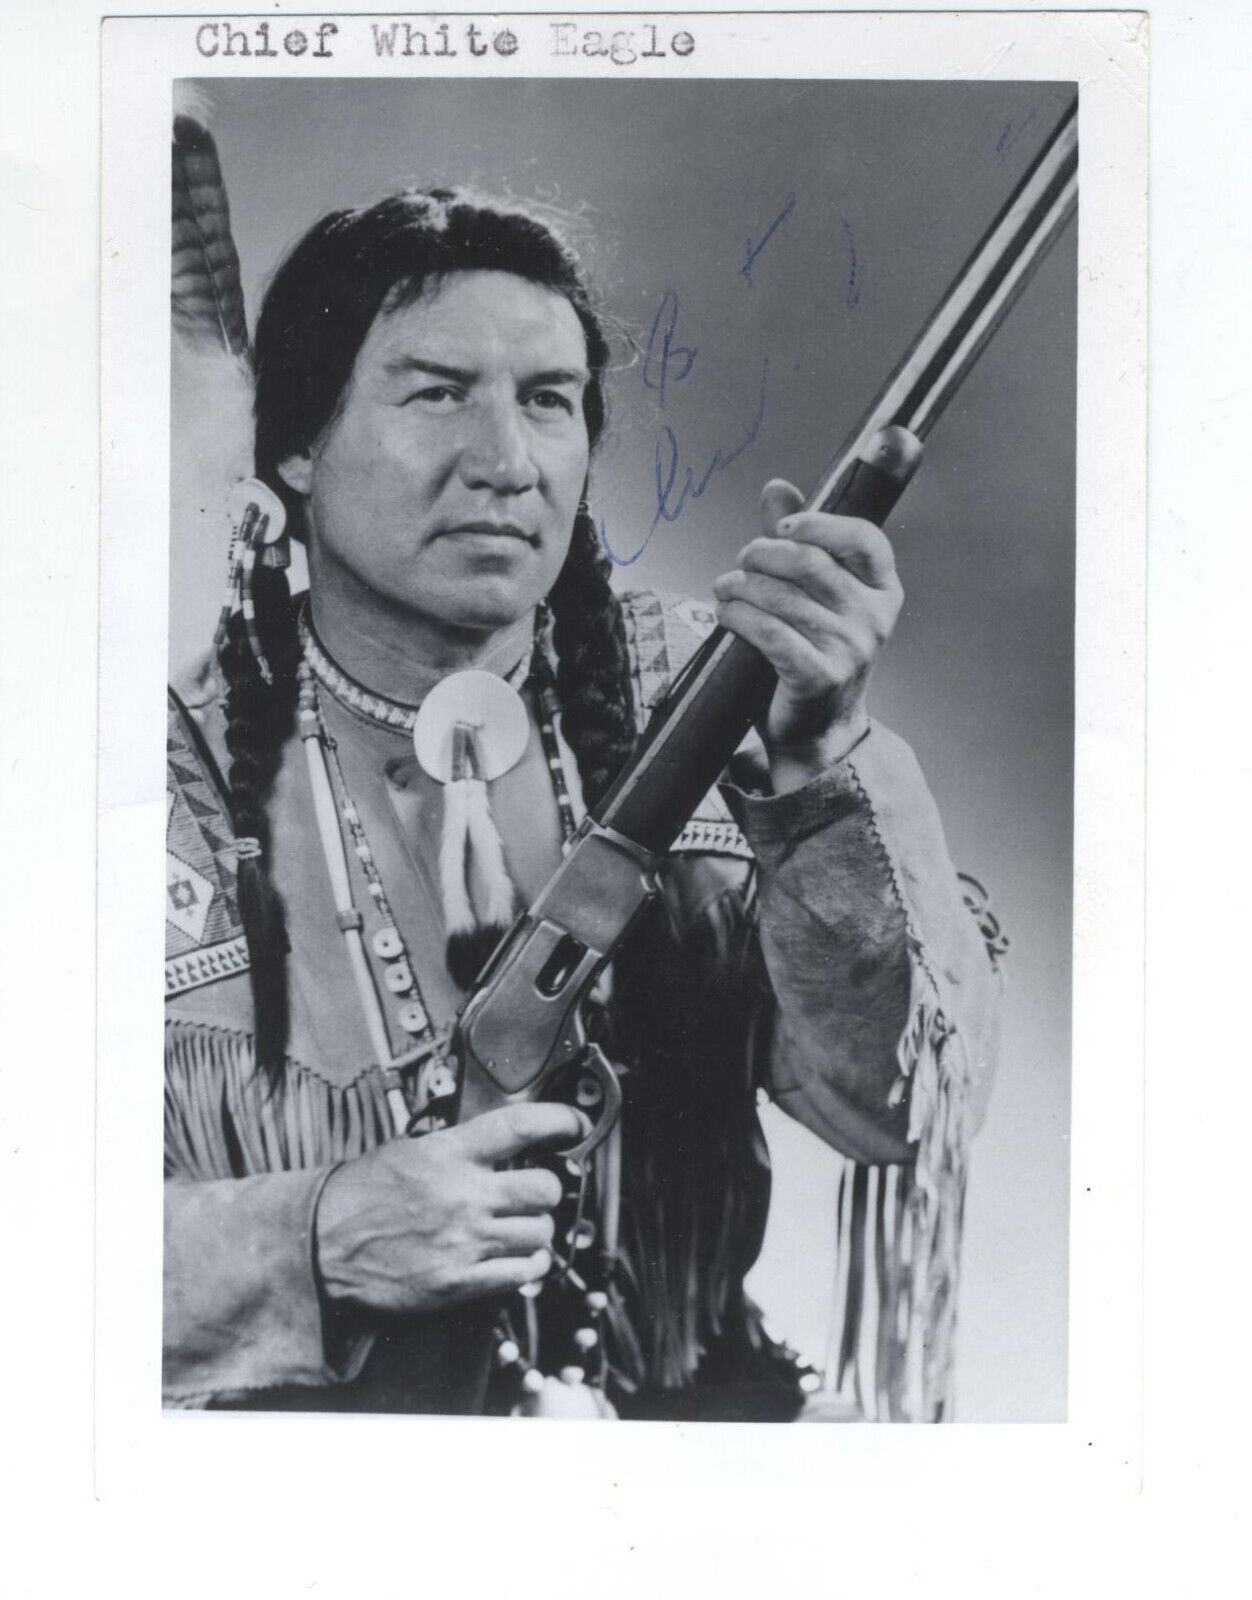 Old NATIVE AMERICAN MOHAWK INDIAN CHIEF White eagle SIGNED PHOTO ACTOR SCARCE